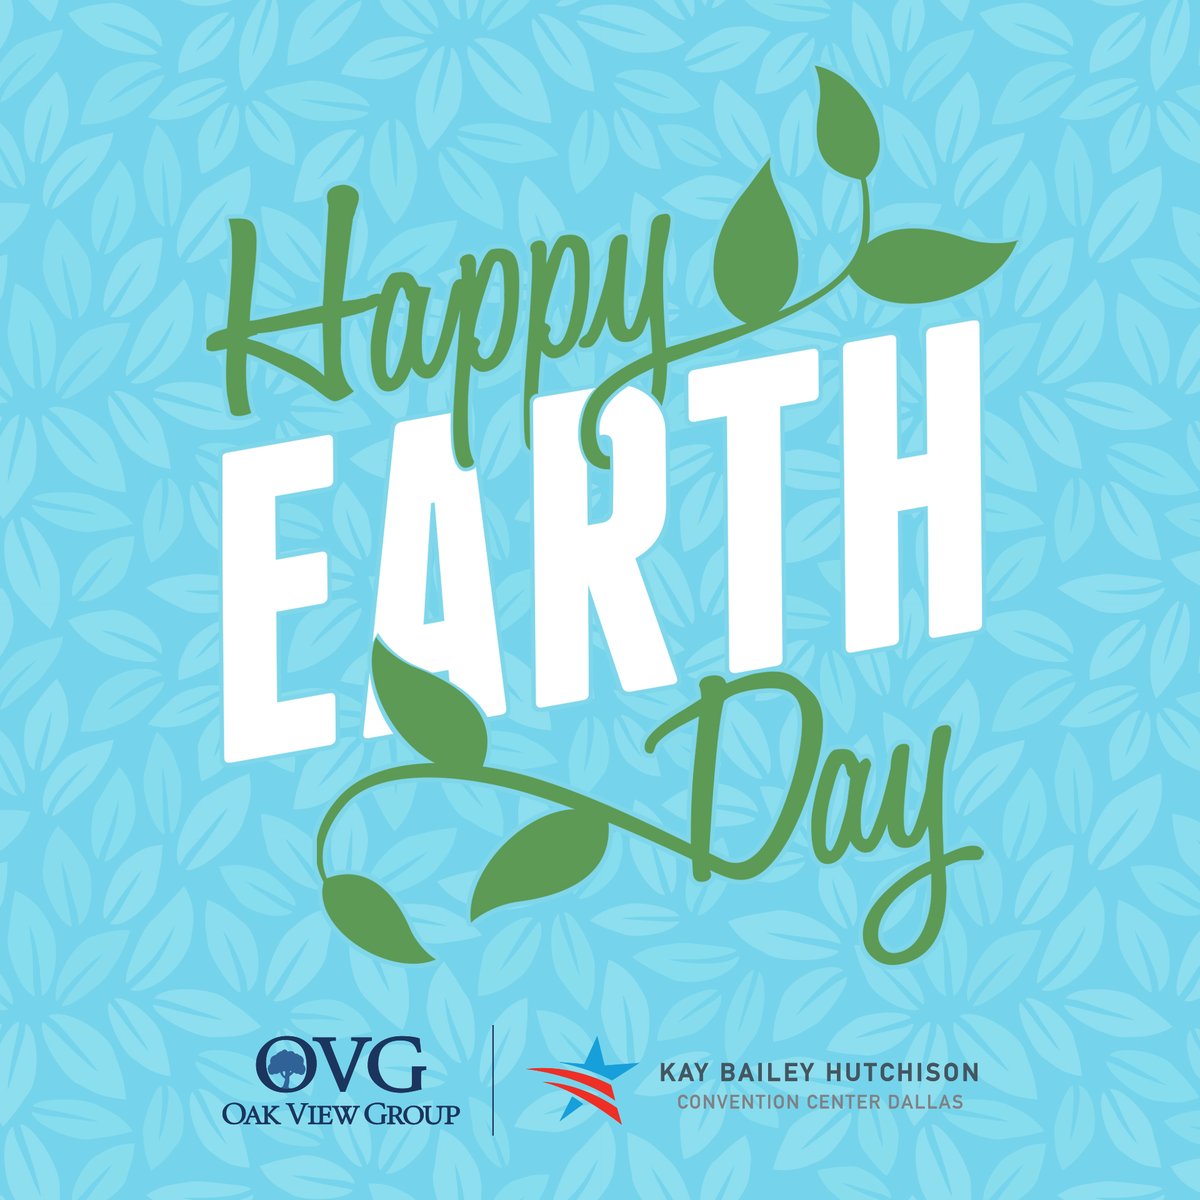 Happy Earth Day! #KBHCCD is committed to sustainability and believes that #EarthDayisEveryDay. 🌎

Learn more at bit.ly/KBHCCD_Green 💚